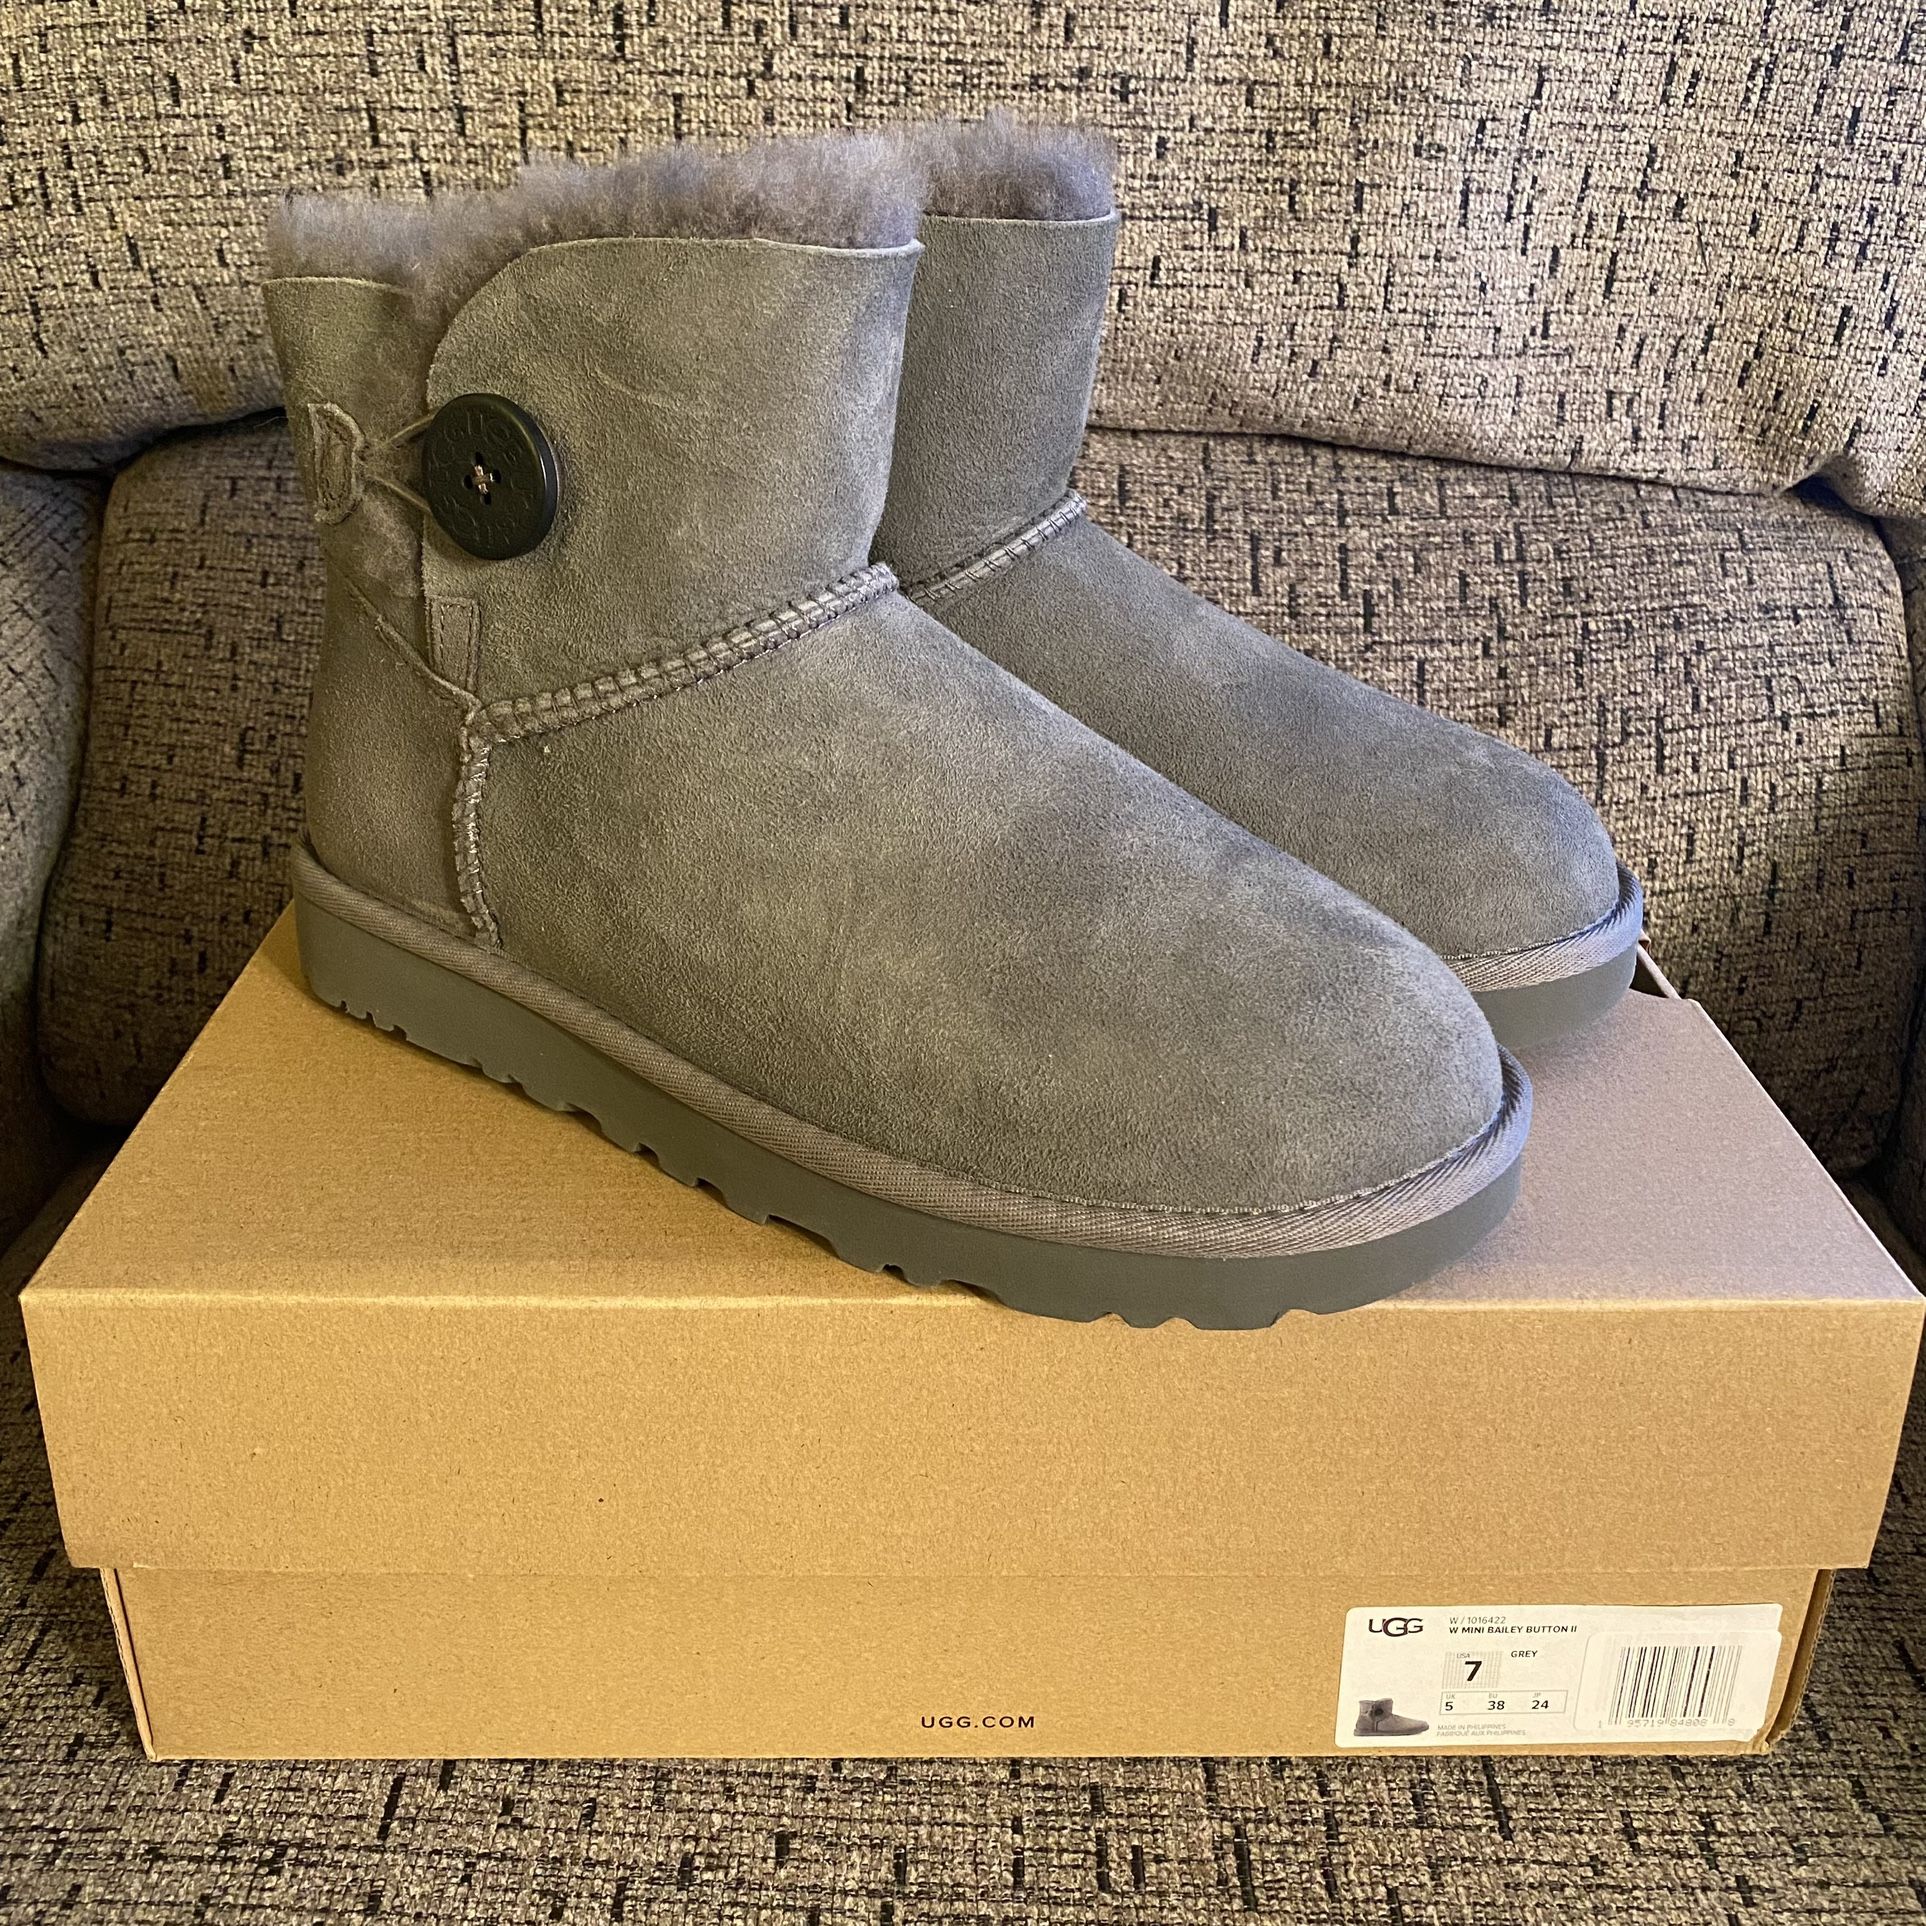 New Women's UGG Mini Bailey Button II Winter Boots Shoes US 7 Gray 1016422